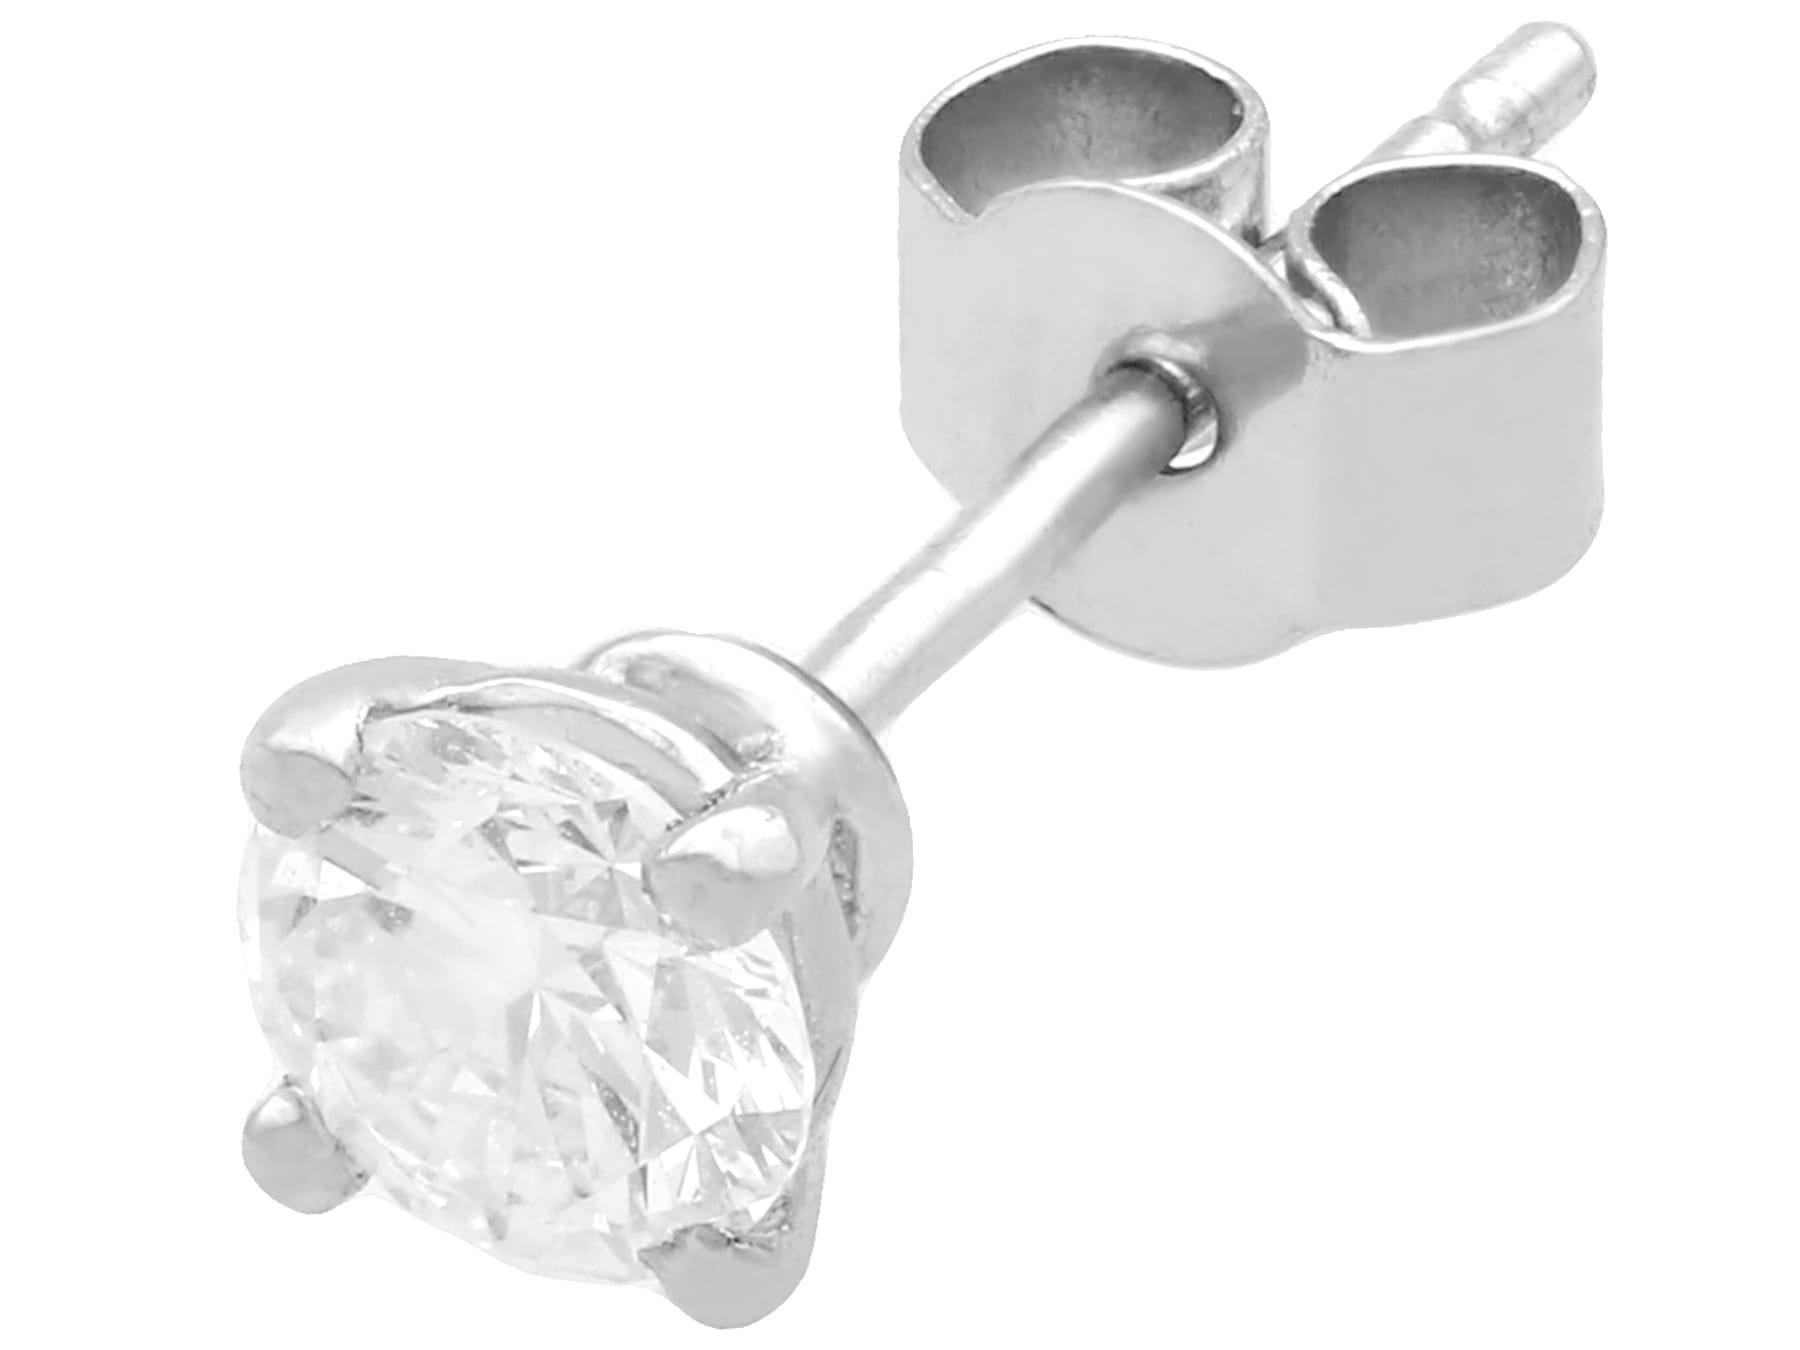 A fine and impressive pair of vintage and contemporary 0.87 carat diamond and platinum stud earrings; part of our diverse diamond jewelry and estate jewelry collections

These fine and impressive diamond stud earrings have been crafted in